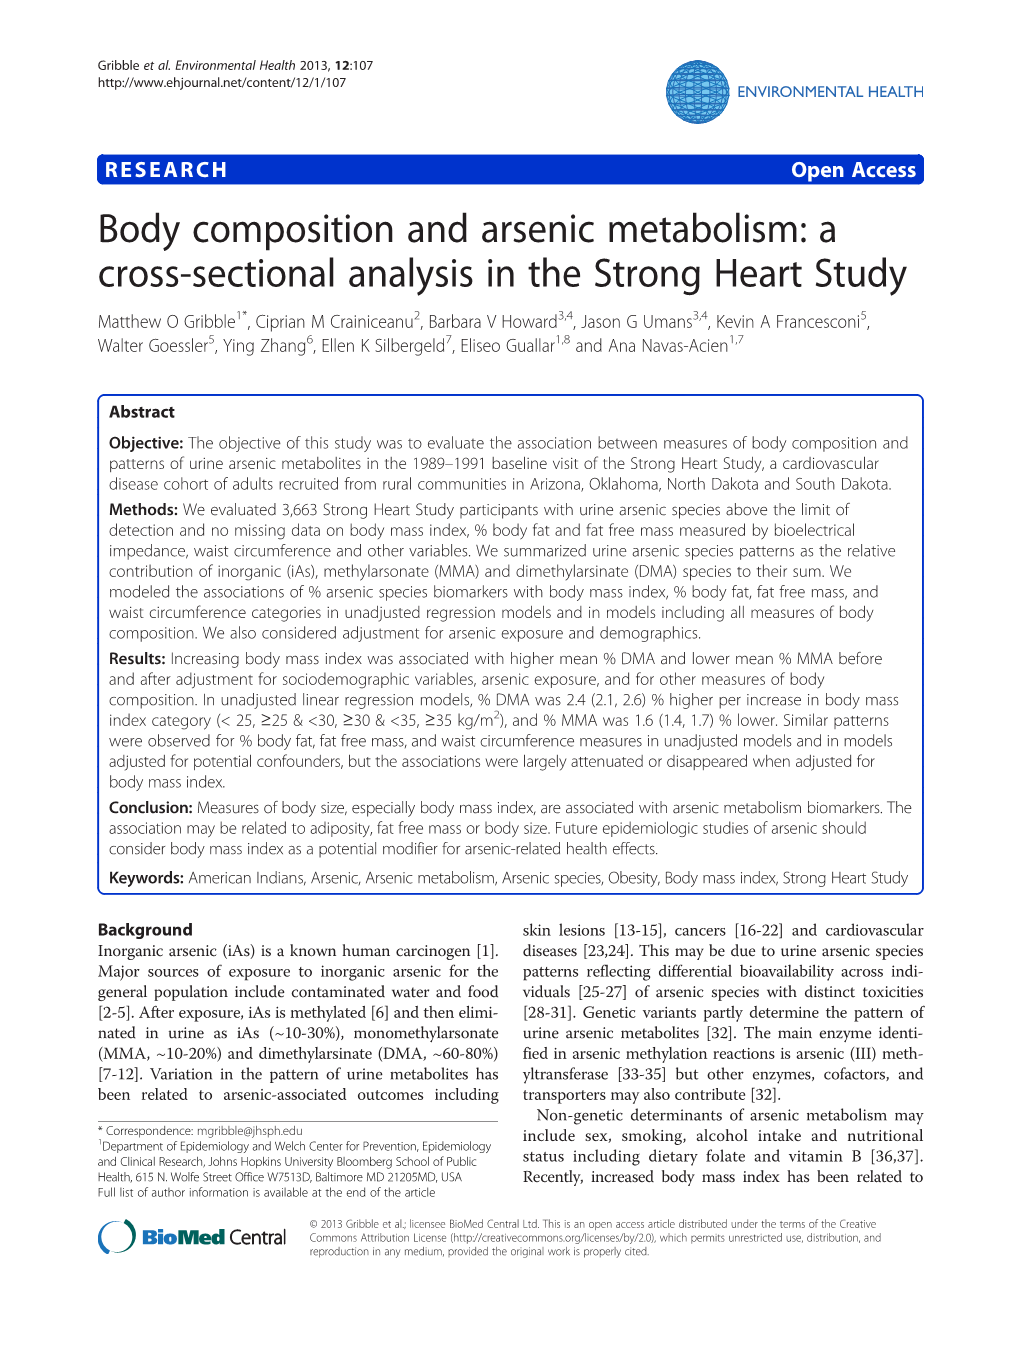 Body Composition and Arsenic Metabolism: a Cross-Sectional